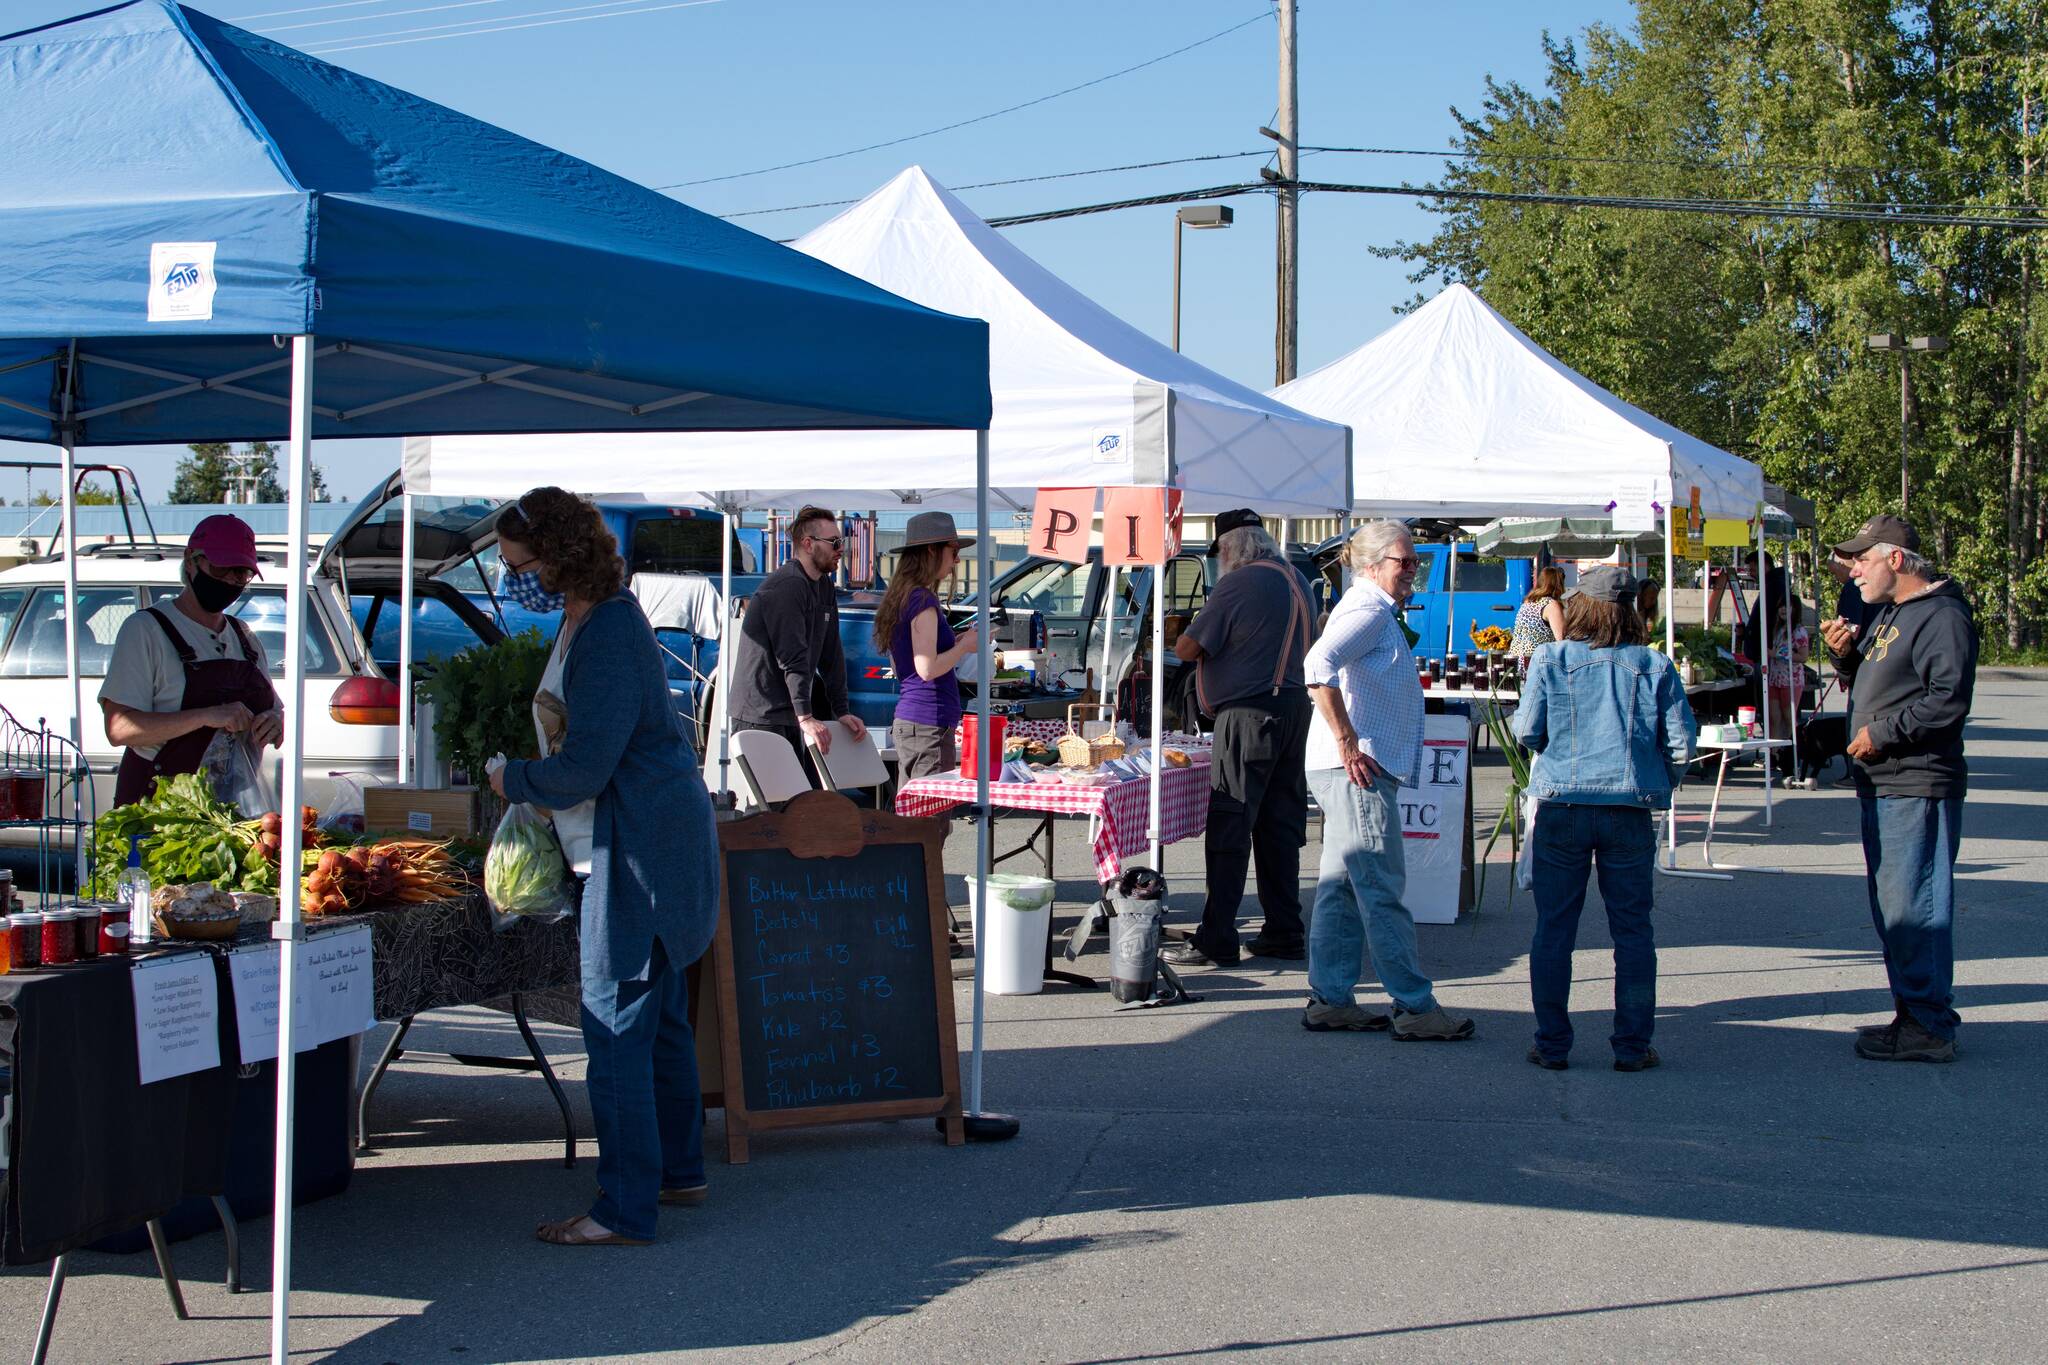 Vendors sell locally grown and crafted products at the Soldotna Saturday Farmers Market during the 2019 season. (Photo provided)